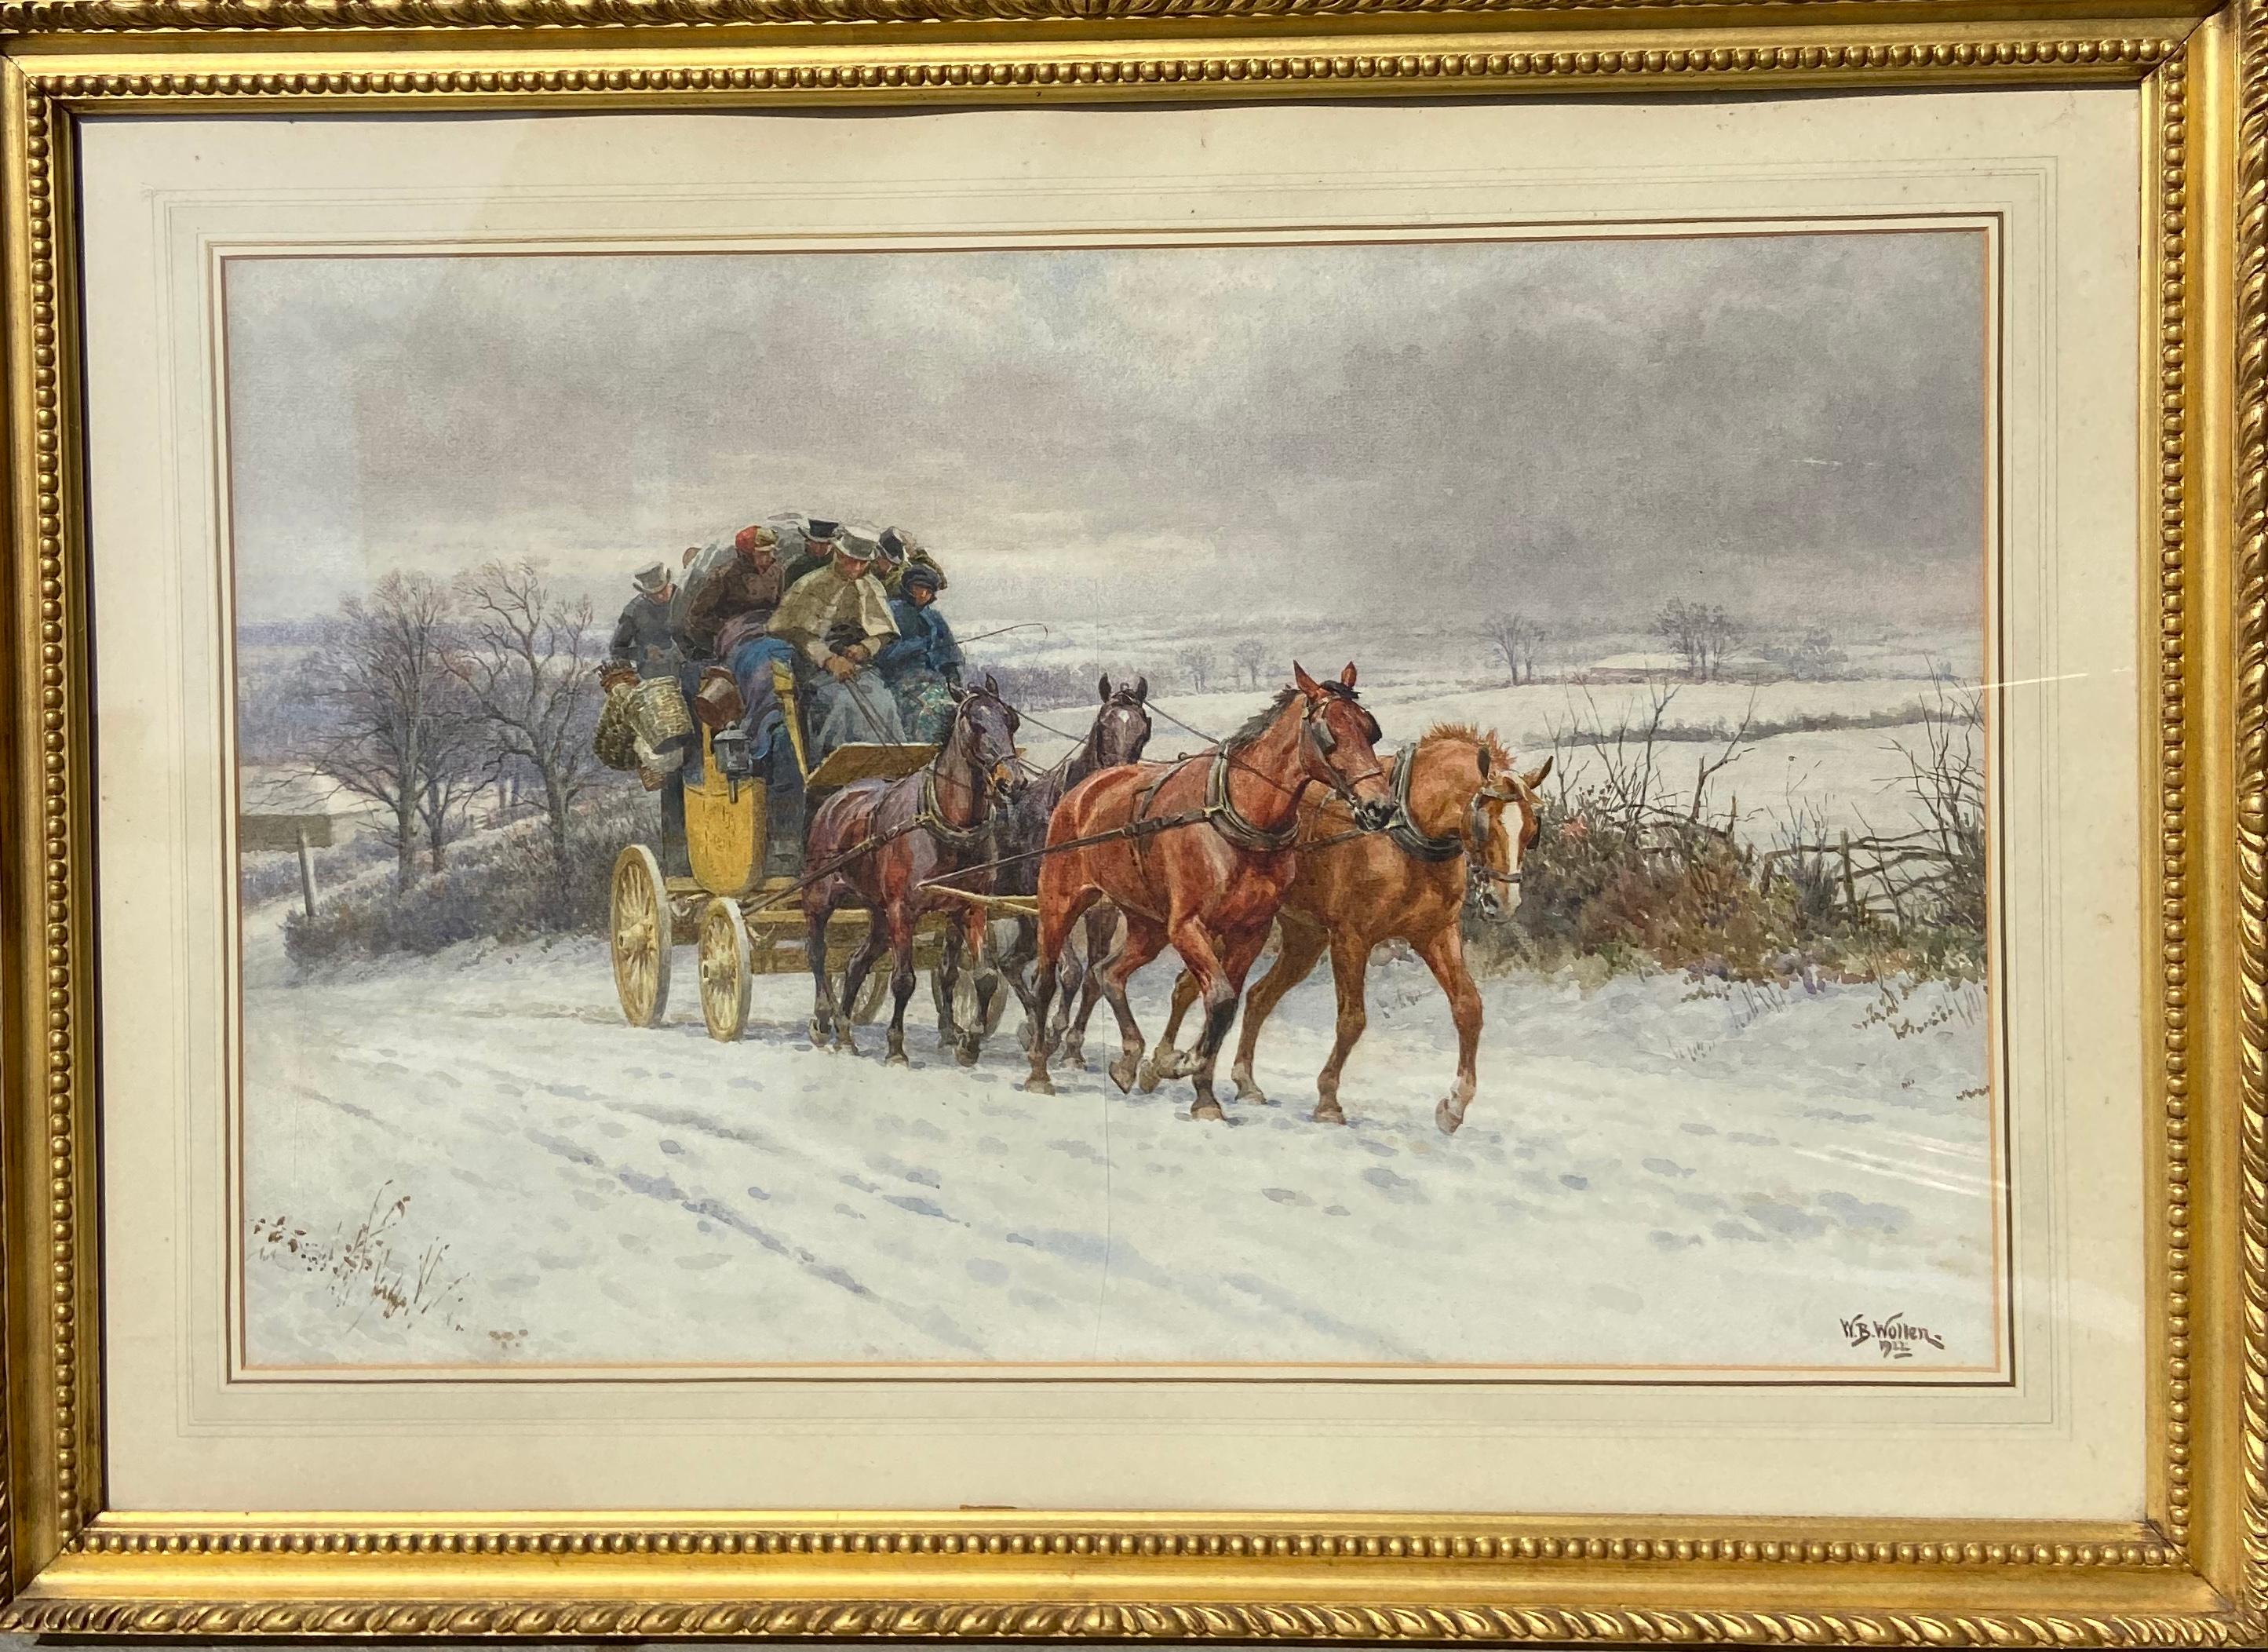 William Barnes Wollen Animal Painting - Gorgeous 19th Century Watercolour of a Horse-Drawn Carriage in the Snow